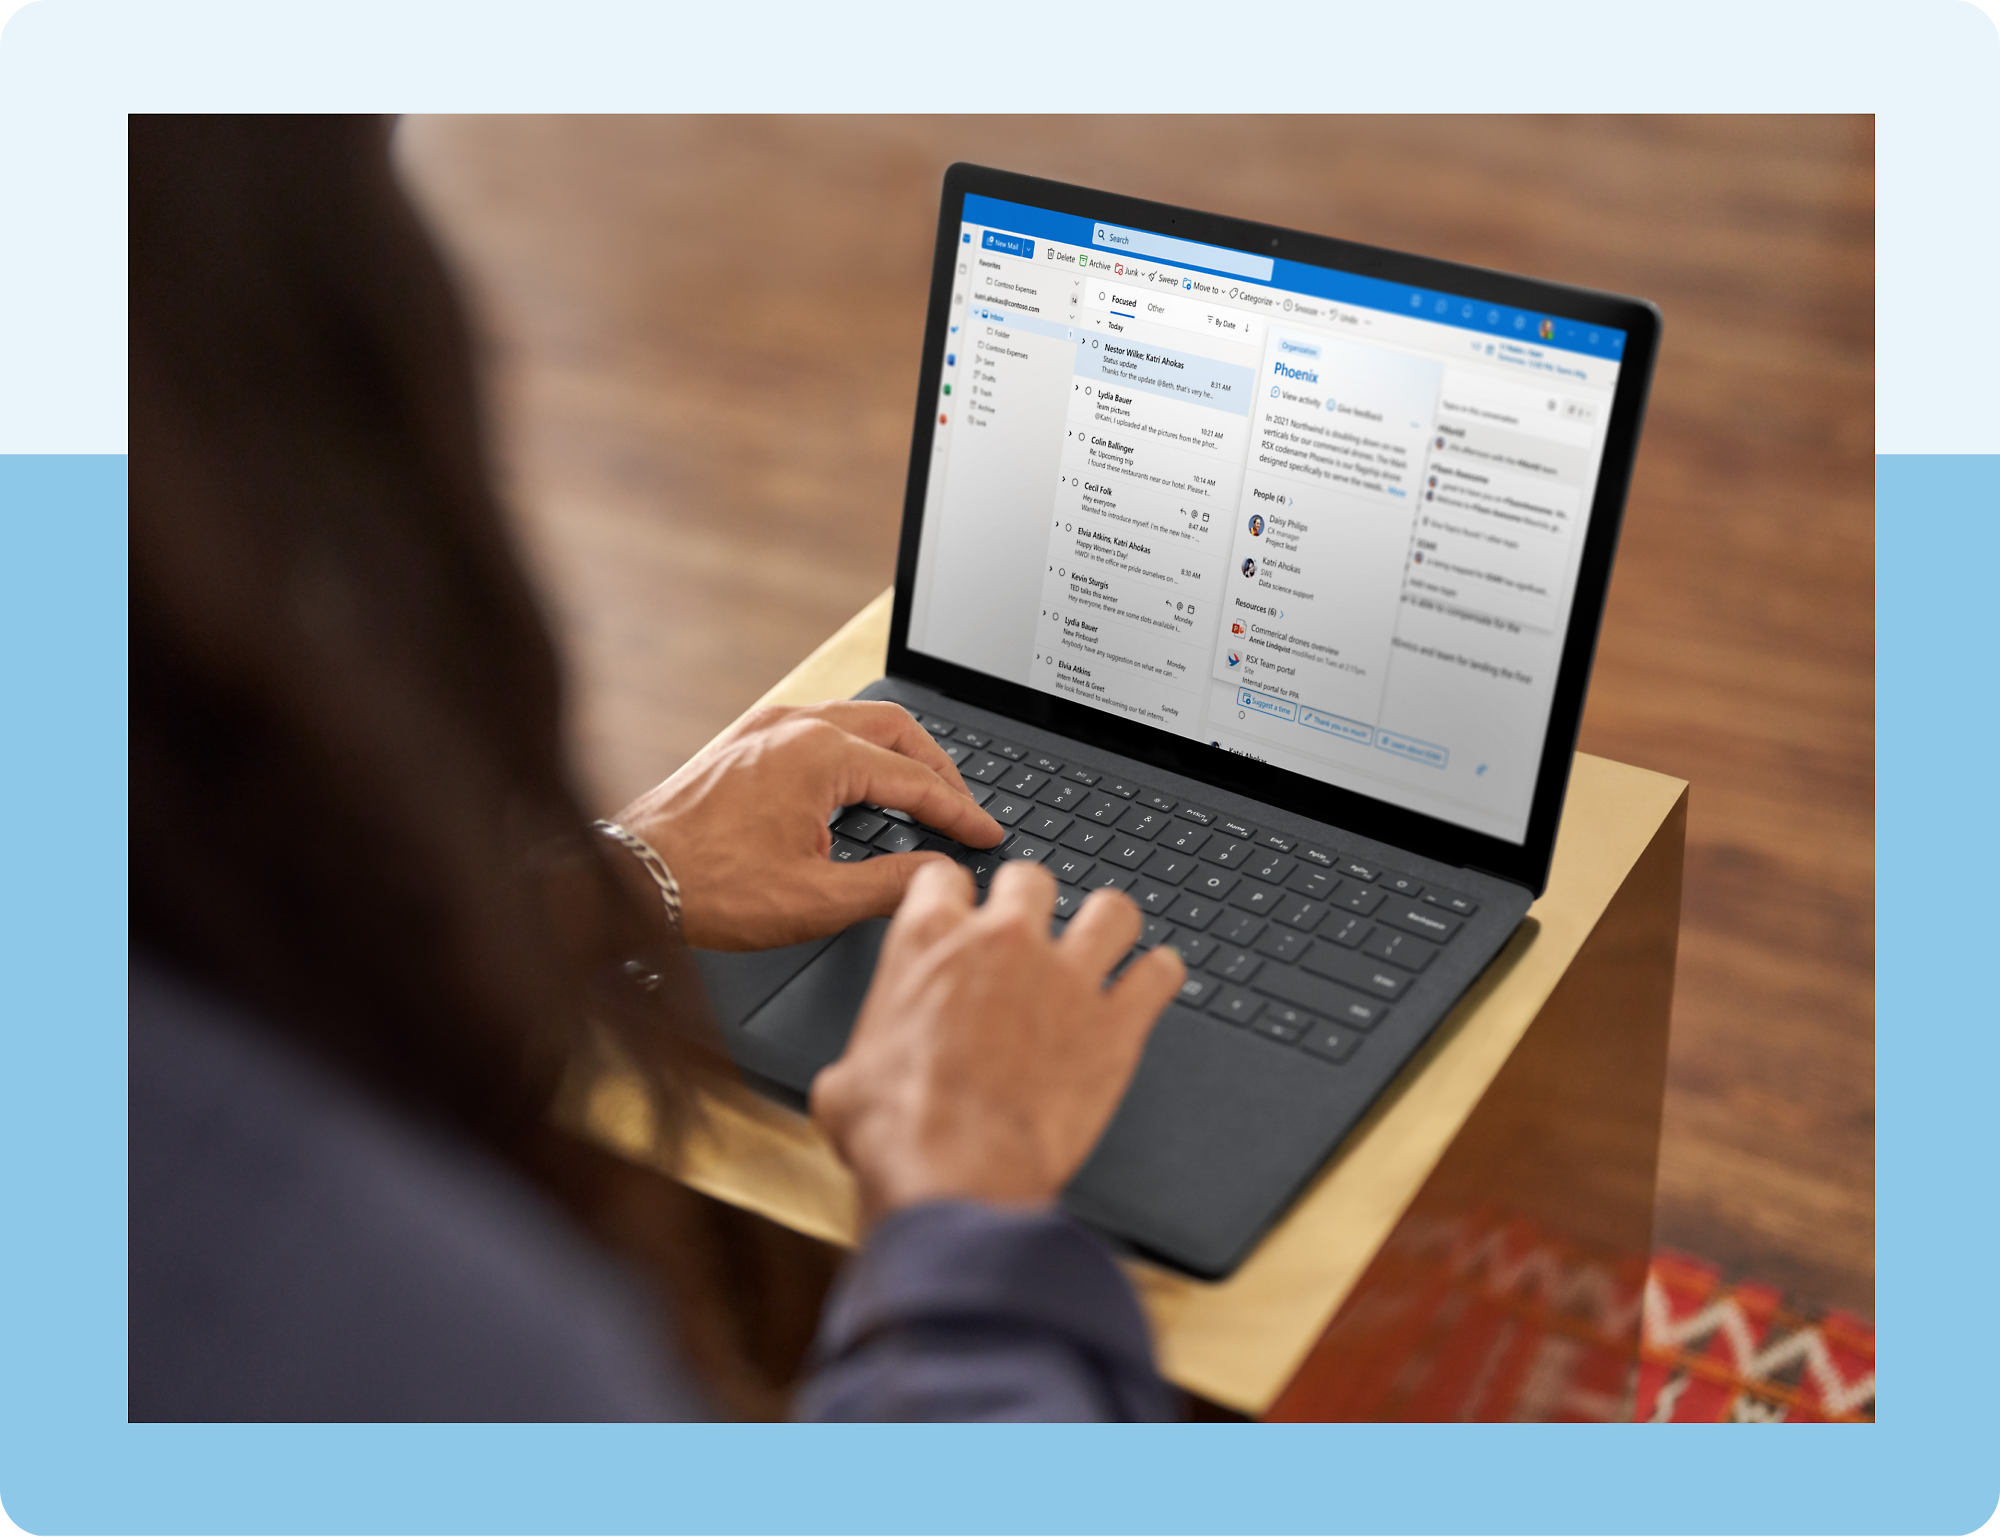 A person typing on a laptop computer displaying the Outlook app